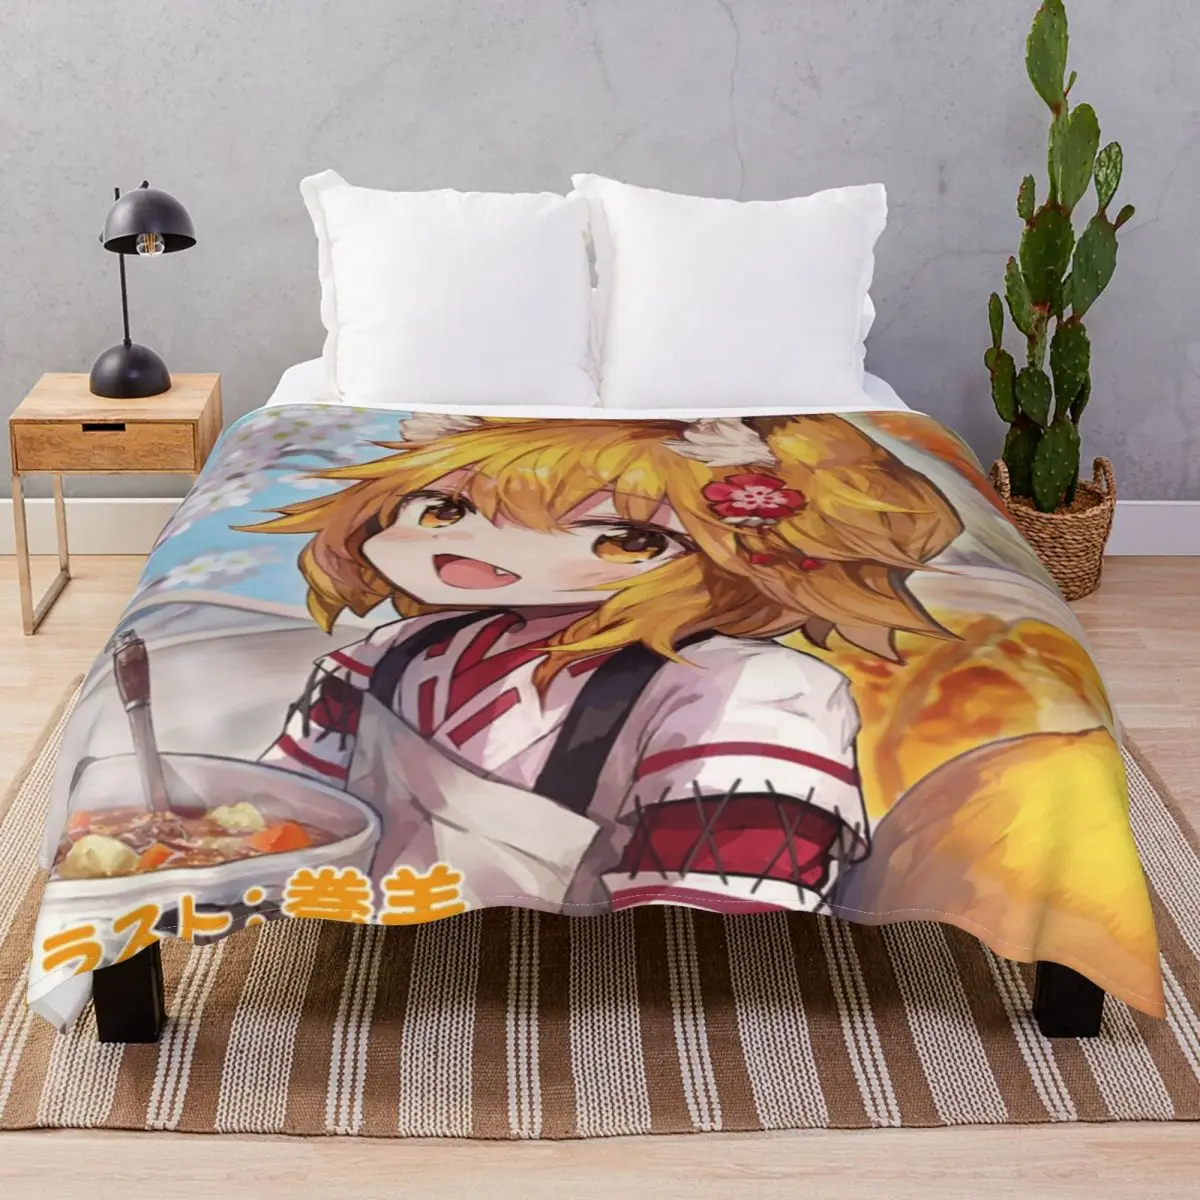 The Helpful Fox Senko-San Blankets Flannel Printed Soft Unisex Throw Blanket for Bedding Home Couch Camp Office